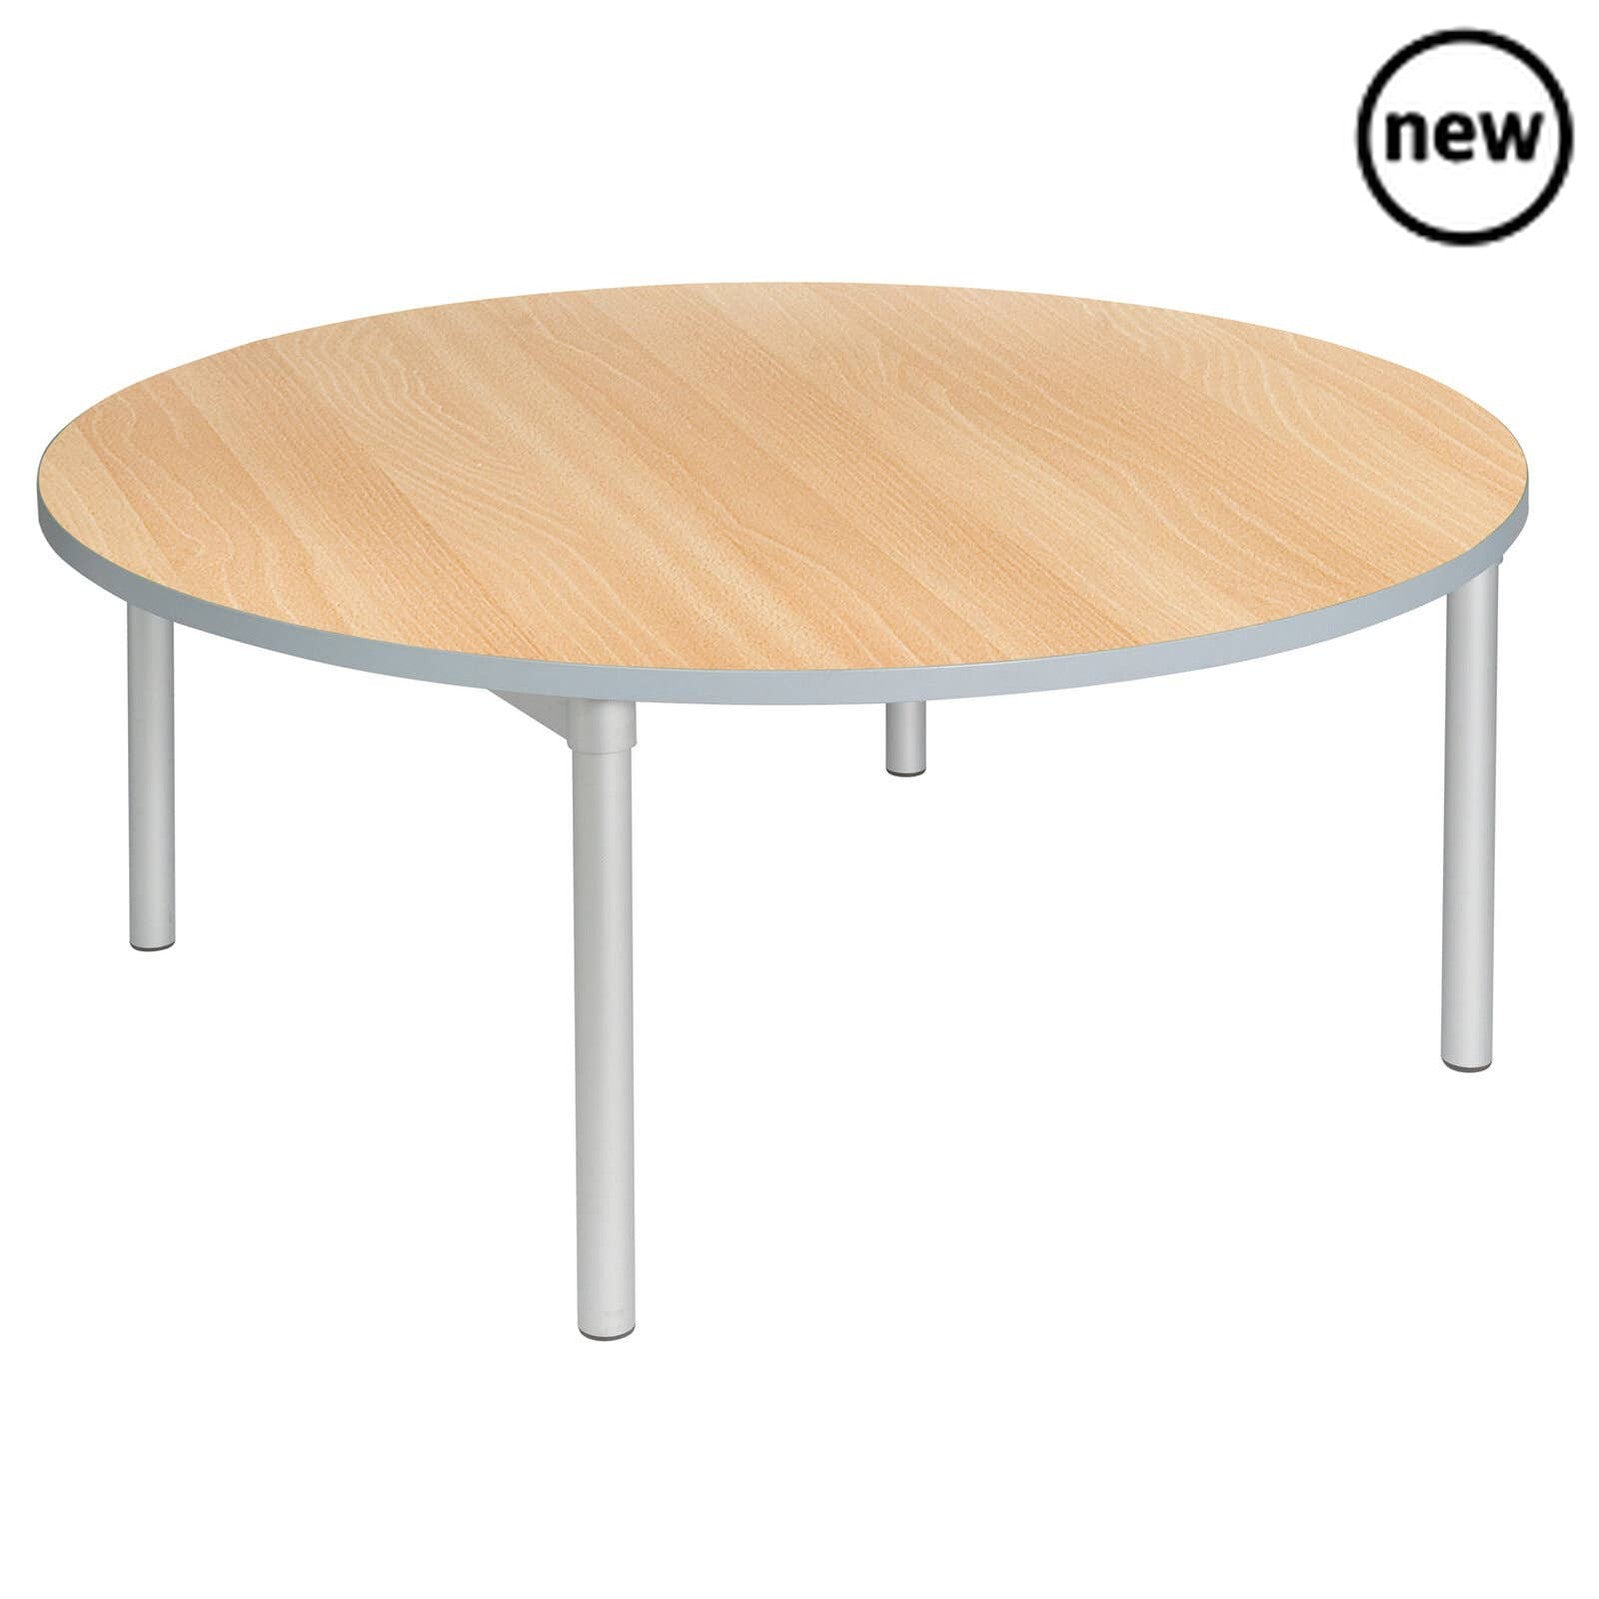 Gopak Enviro Round Classroom Table, The Gopak Enviro Round Classroom Table is a versatile and lightweight table that is perfect for various uses, including as a classroom table, dining table, or for reception and breakout spaces. With a diameter of 1200mm, this table is spacious enough for multiple users and can easily accommodate various tasks.The table is available in a choice of heights and colors, allowing you to customize it to suit your specific needs and preferences. Whether you need a table for youn